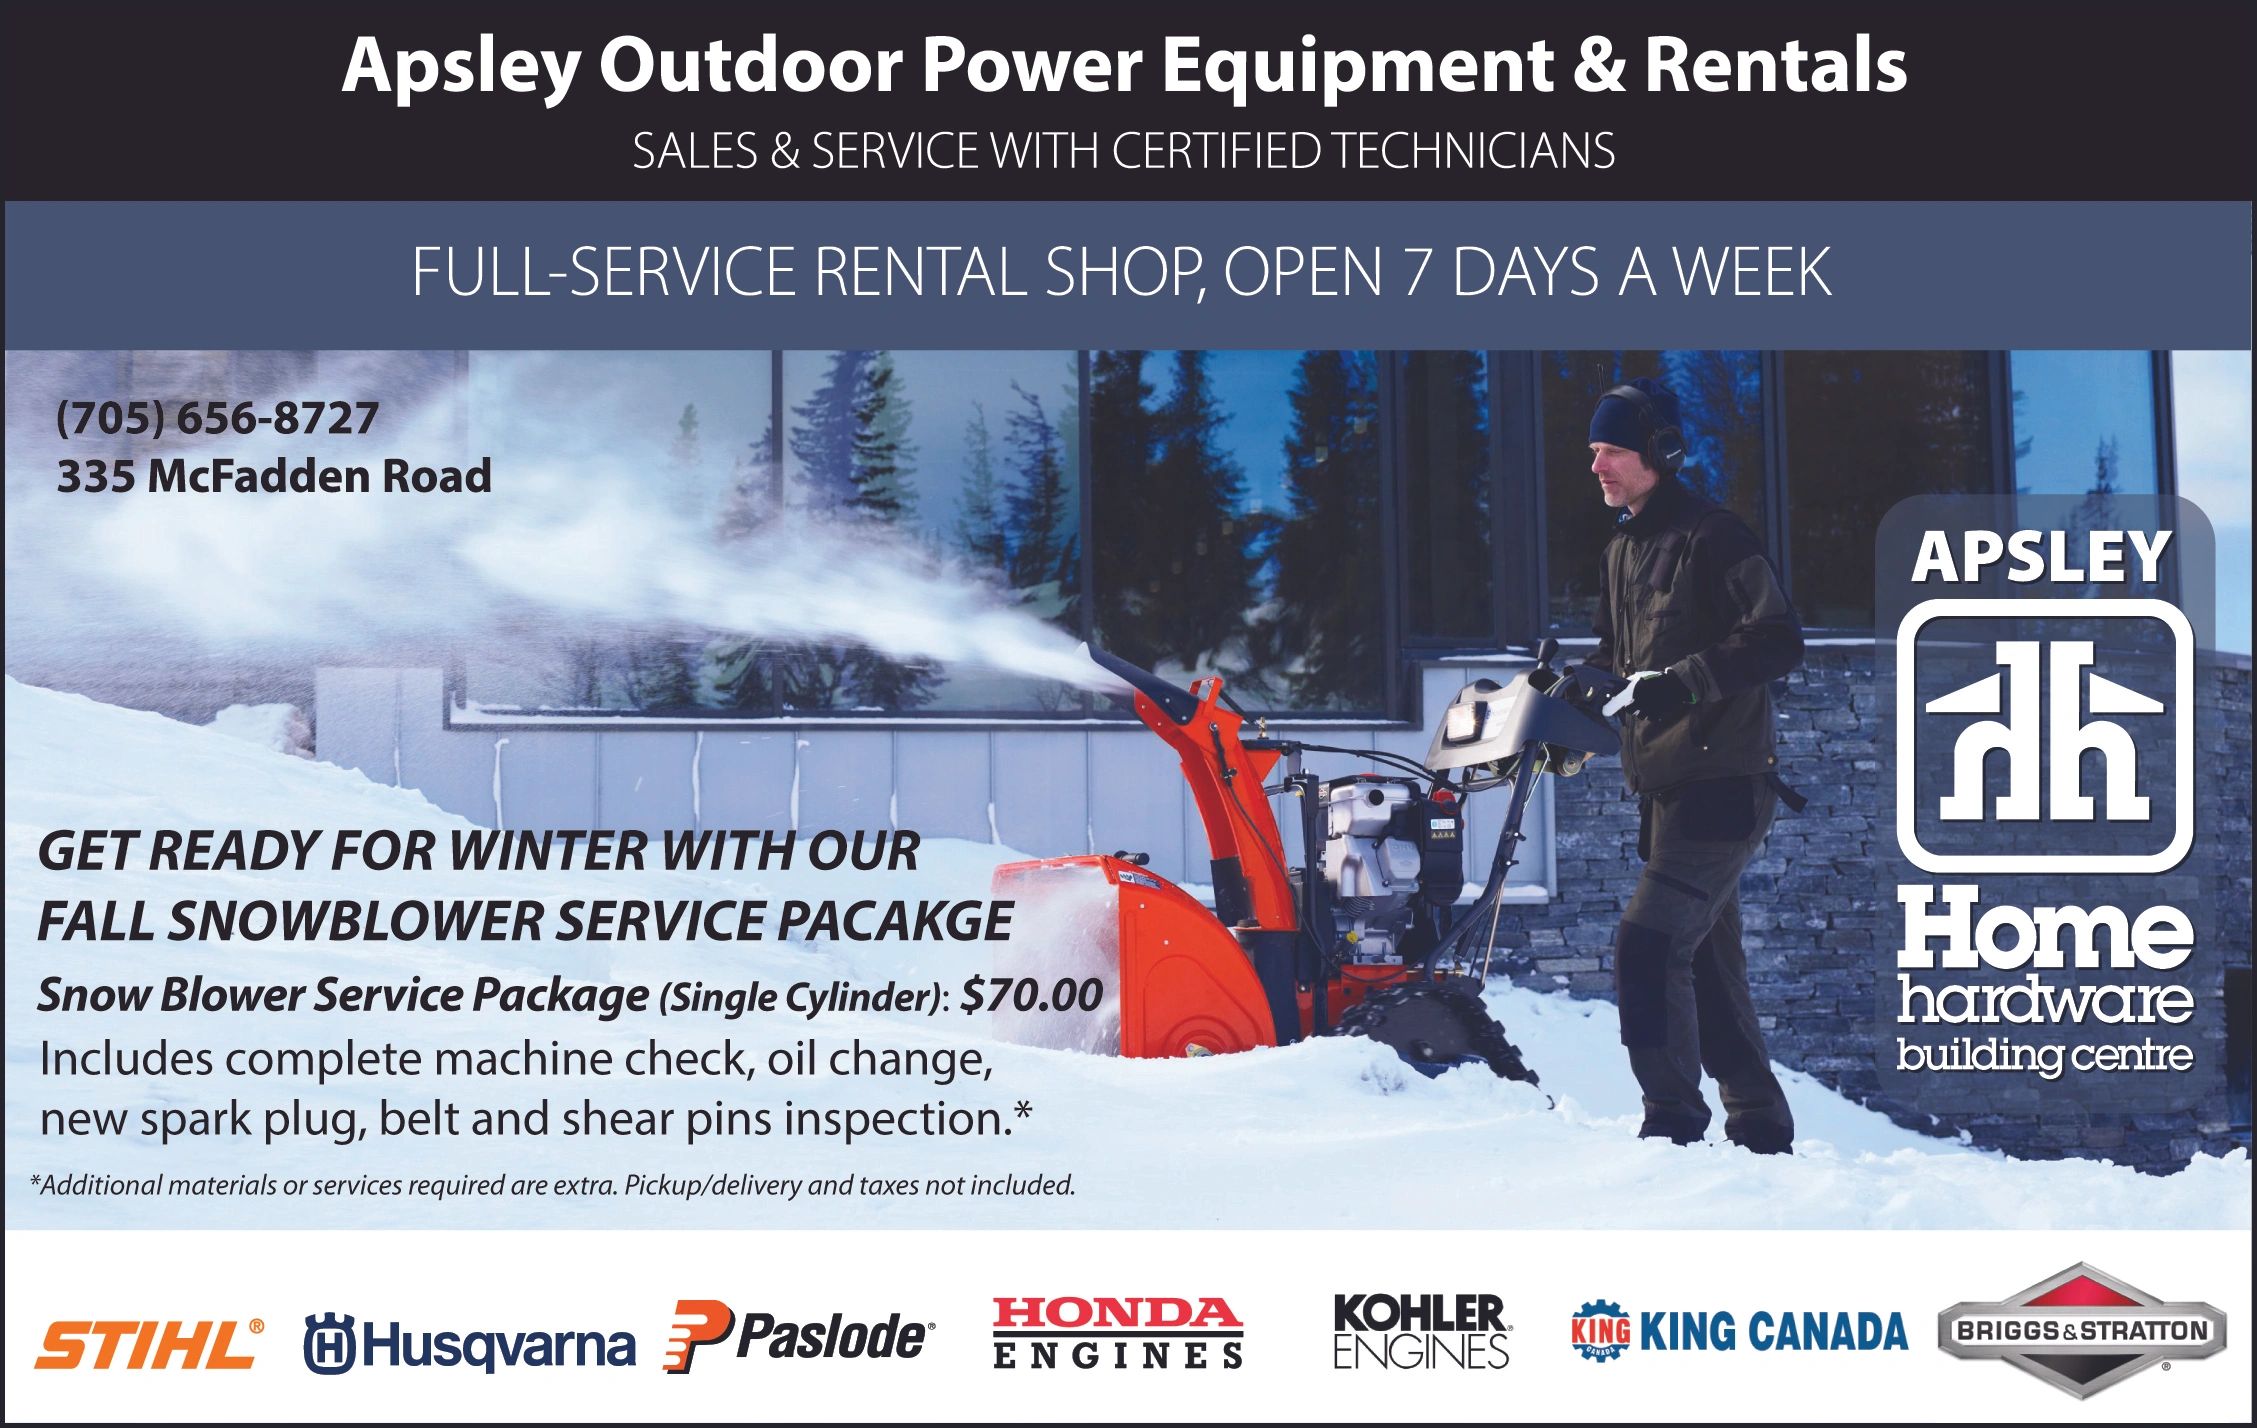 Print Advertising for Apsley Outdoor Power and Equipment